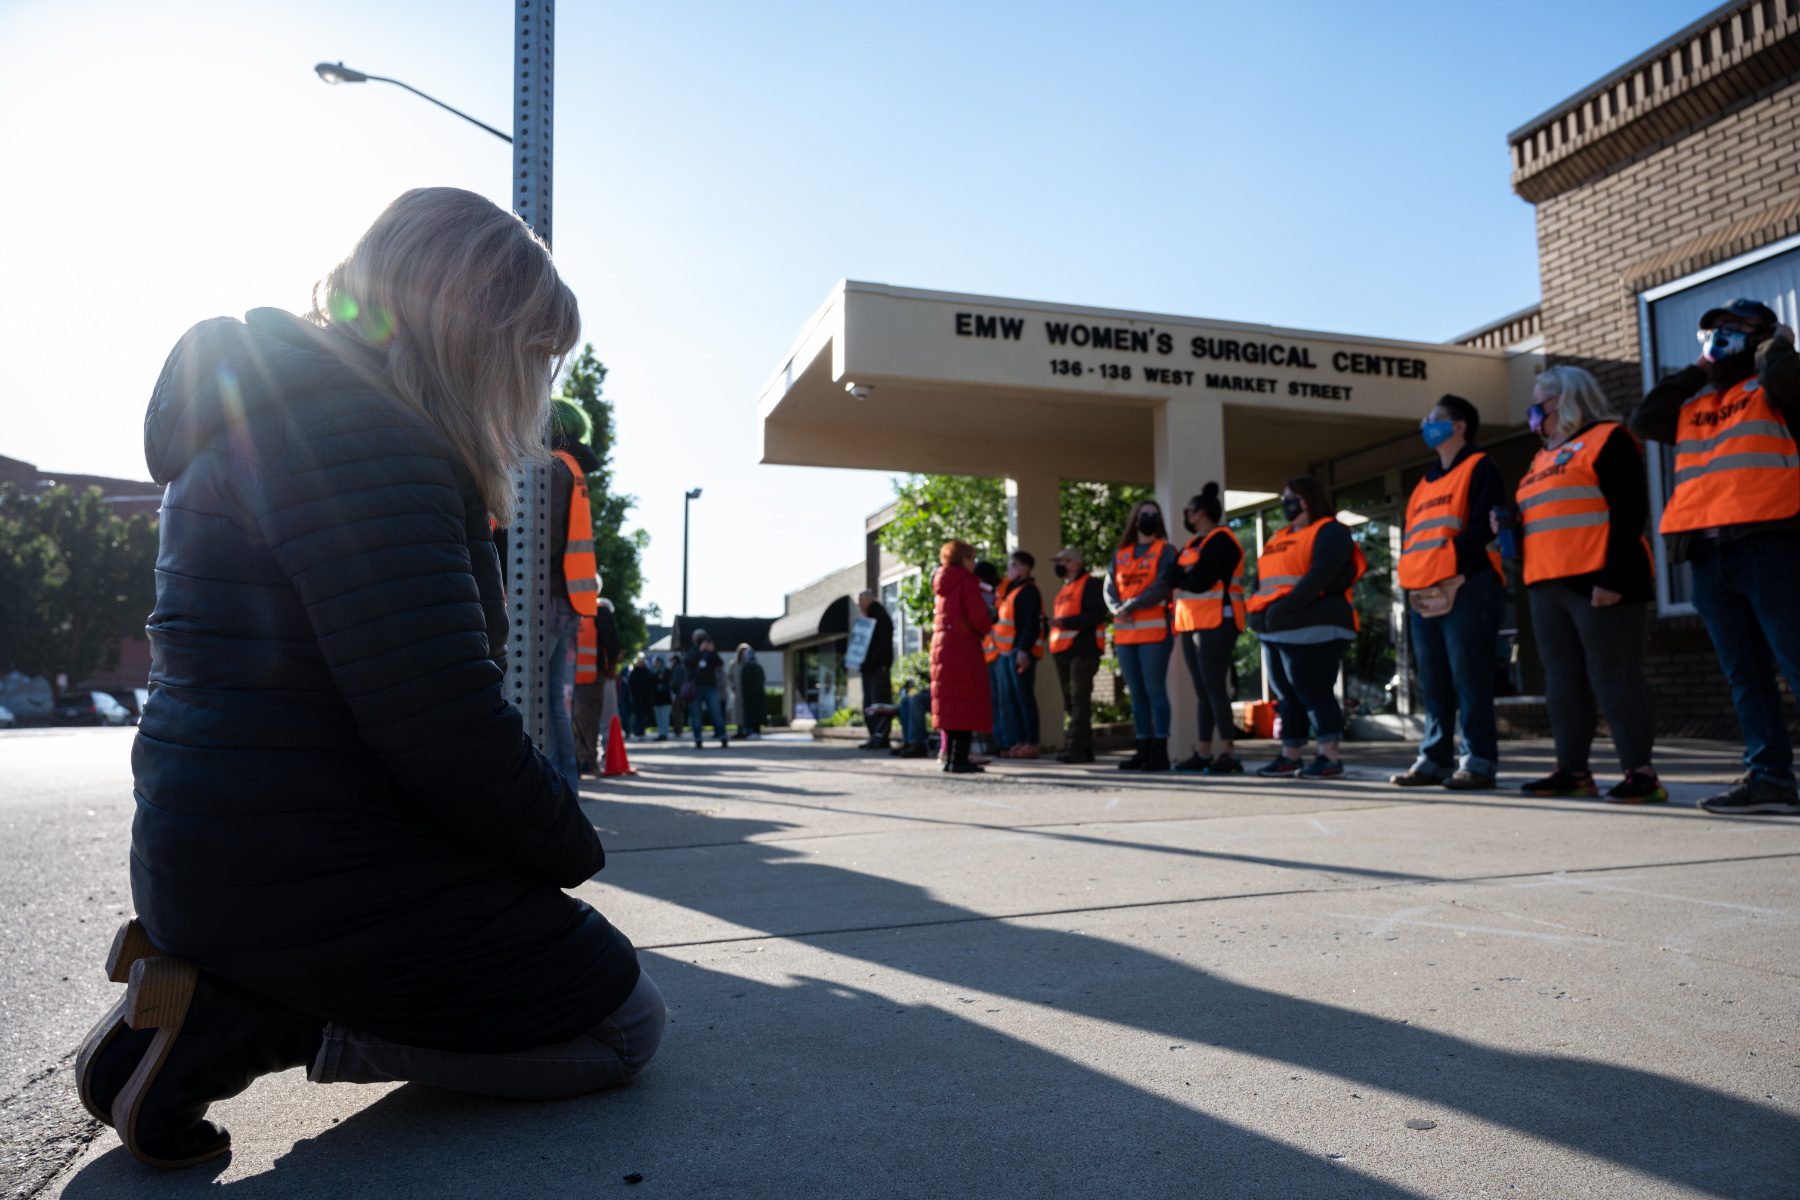 A demonstrator prostrates before a line of volunteer clinic escorts in front of the EMW Women's Surgical Center.